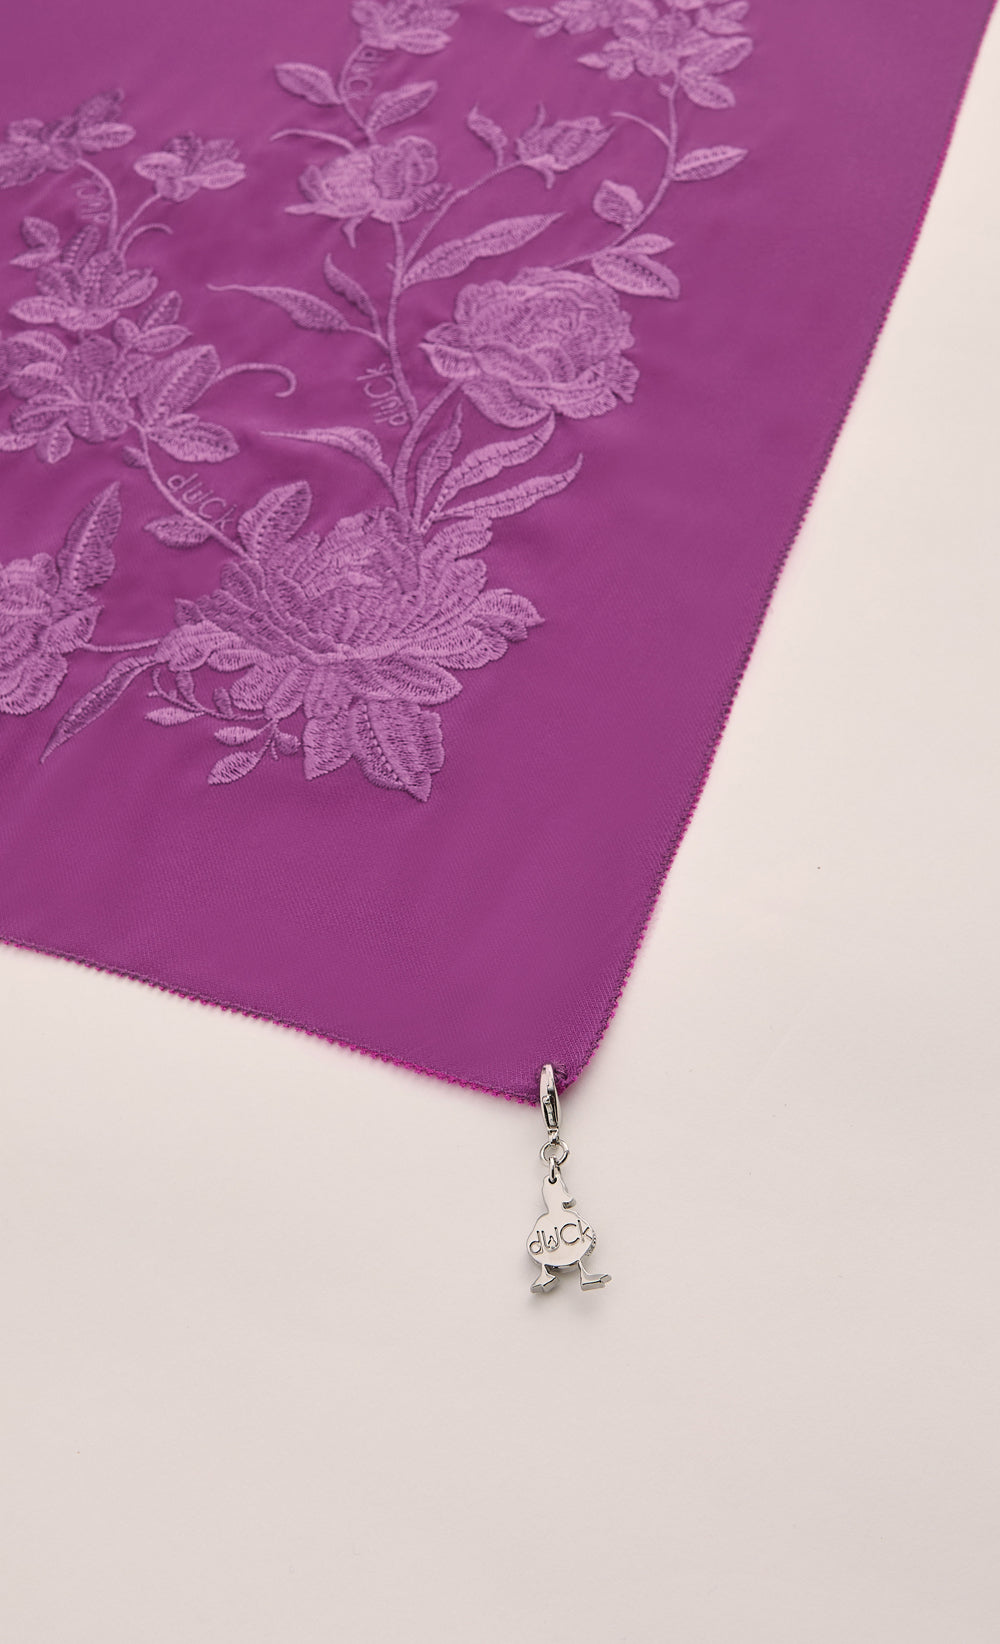 The Peonies Embroidery dUCk Square Scarf in Magenta